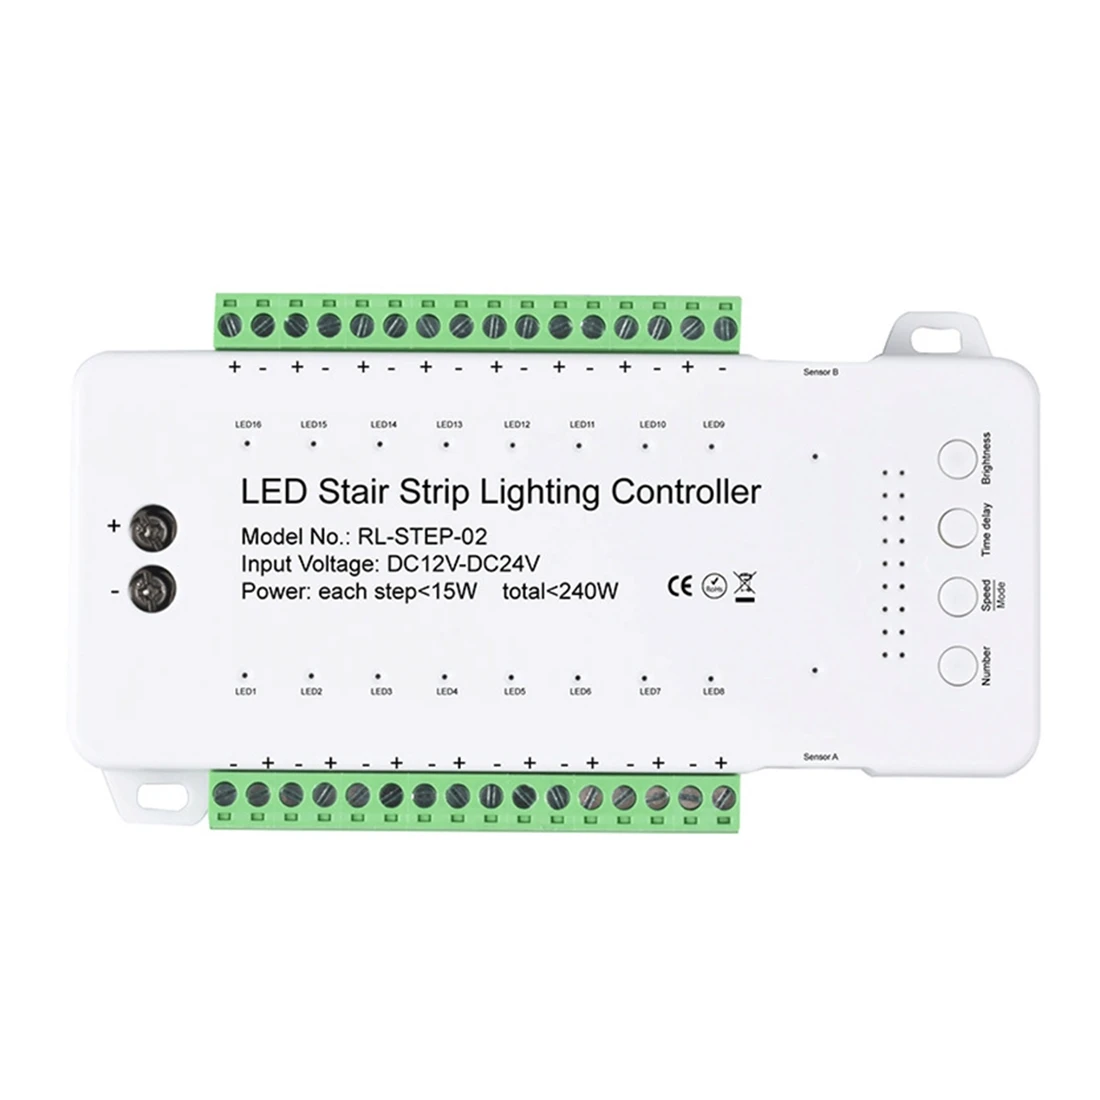 

Dimmable Stair LED Controller 16 Channels Dual PIR Motion Sensor Step Light Strip Staircase Controler for Lamp Strip(A)